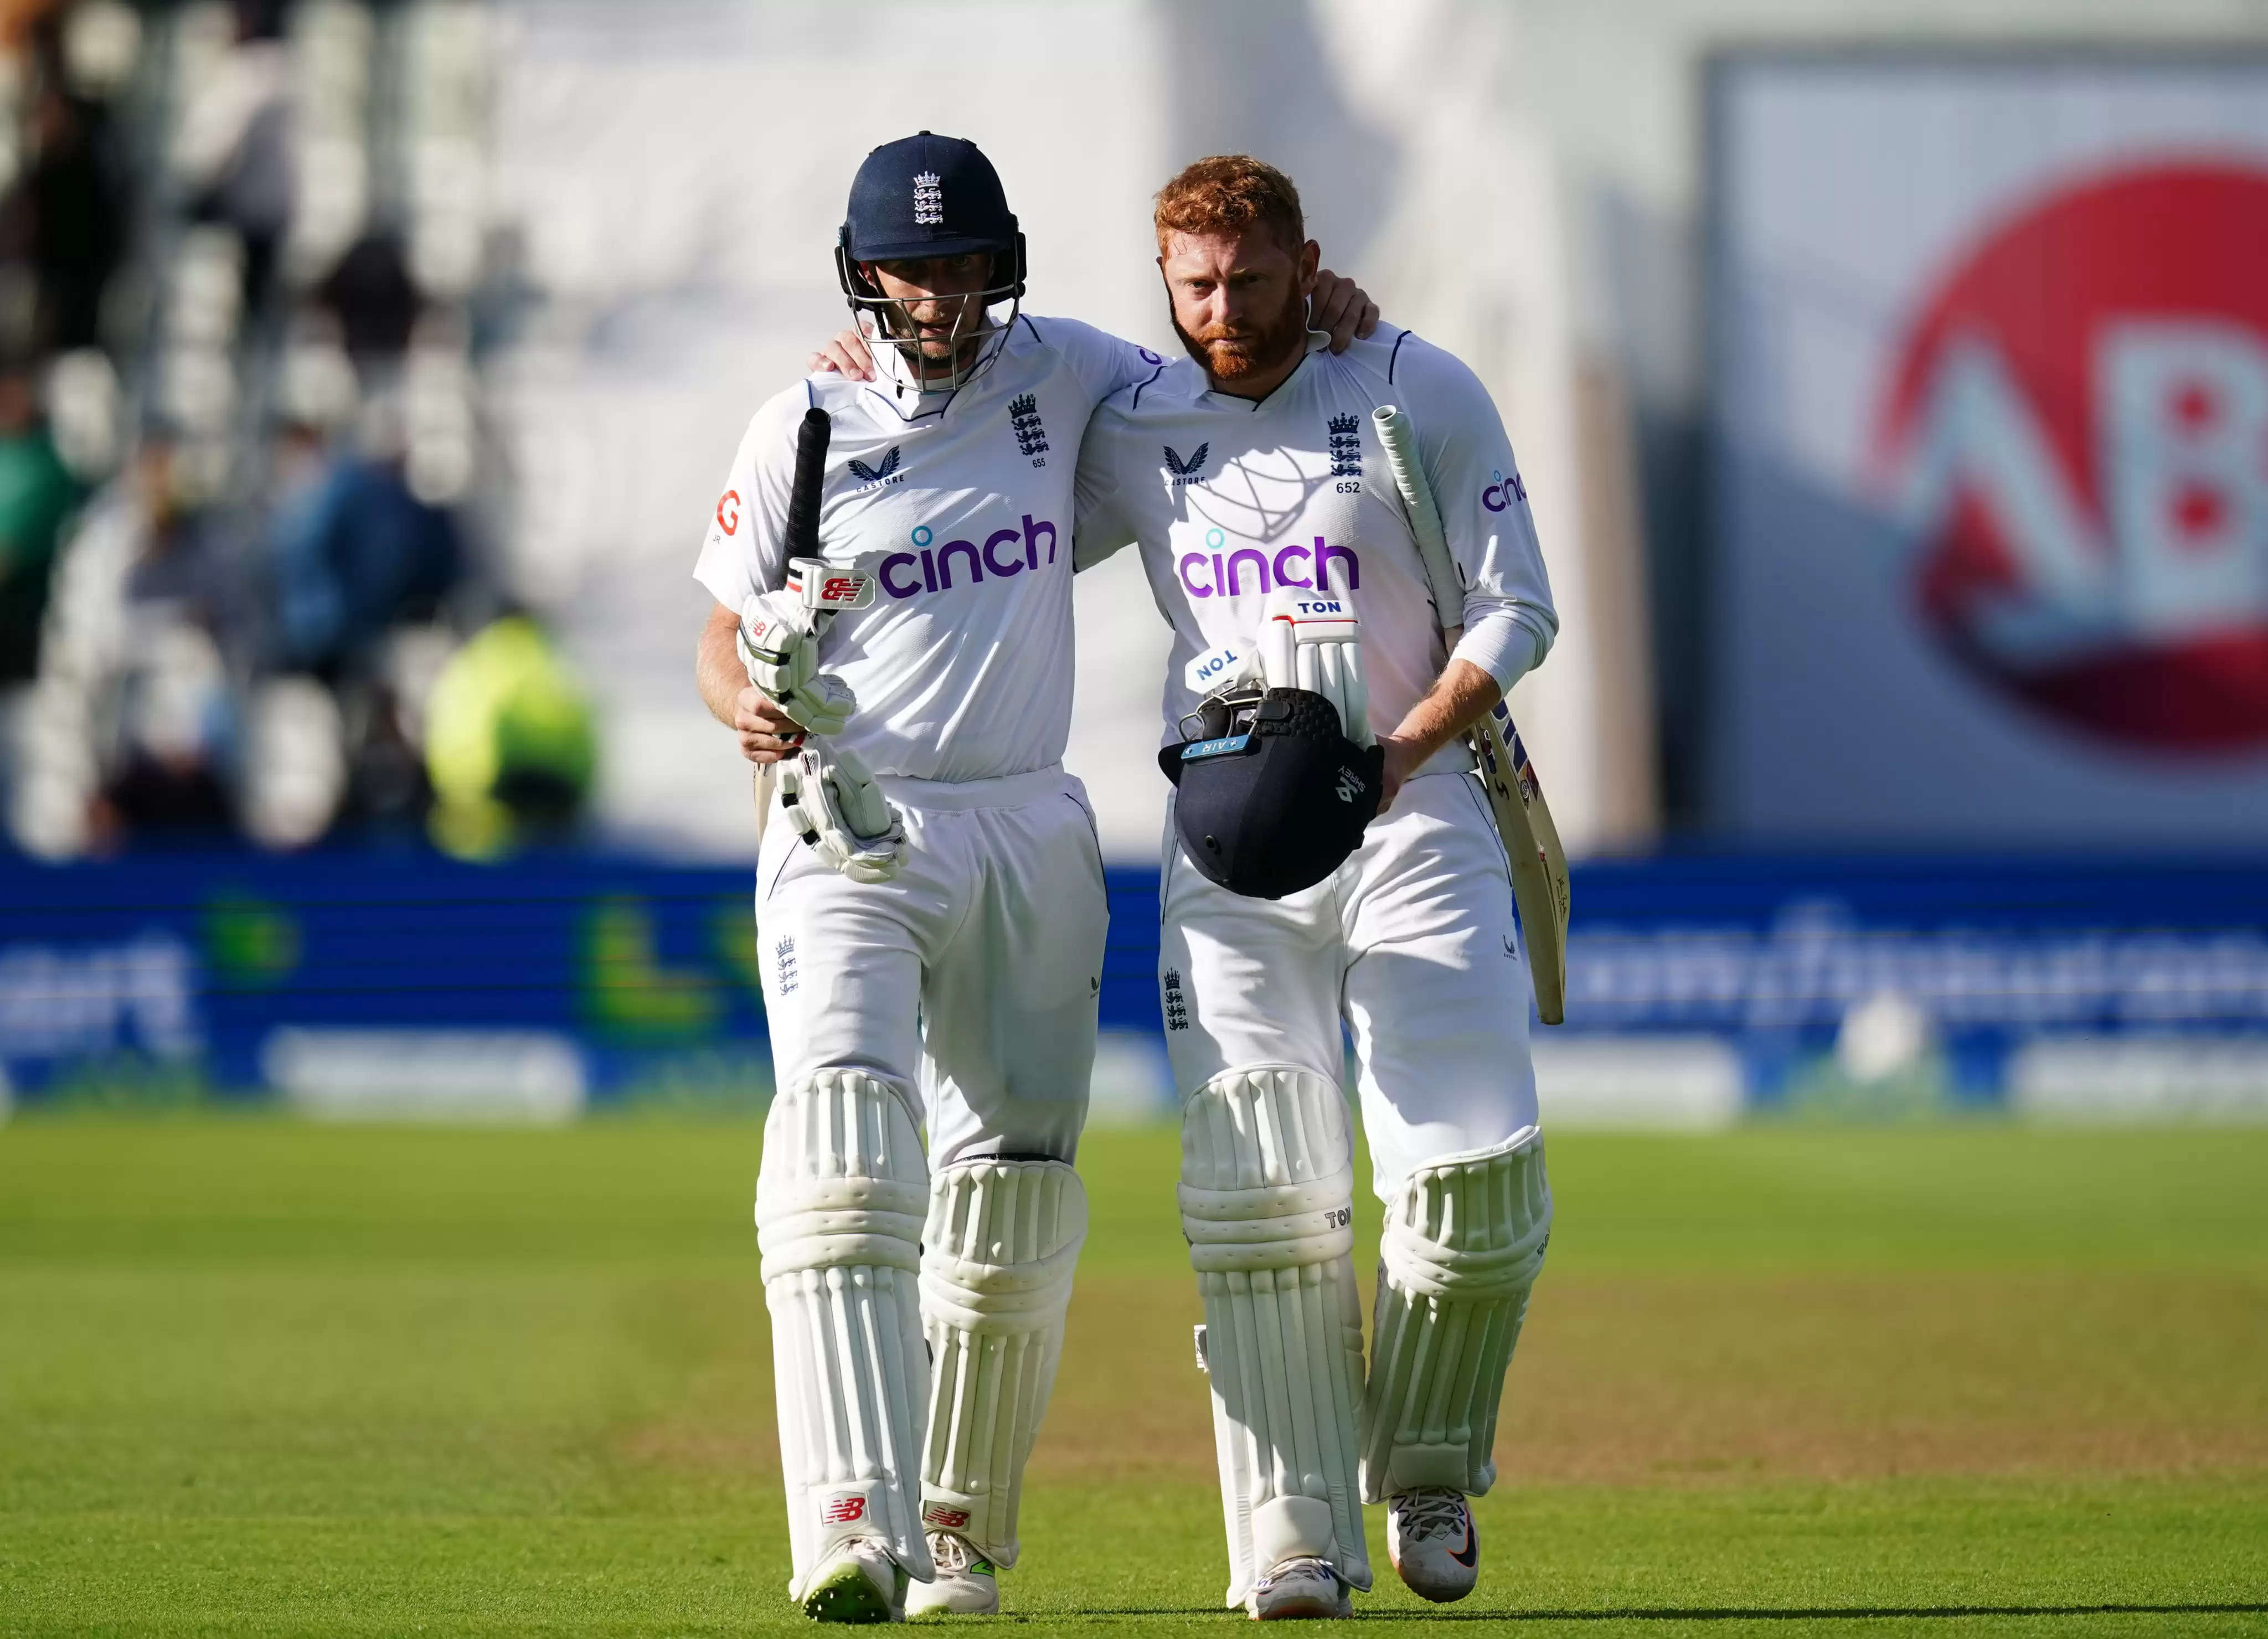 England stand on the verge of Test cricket's ninth most successful run-chase. ?width=963&height=541&resizemode=4